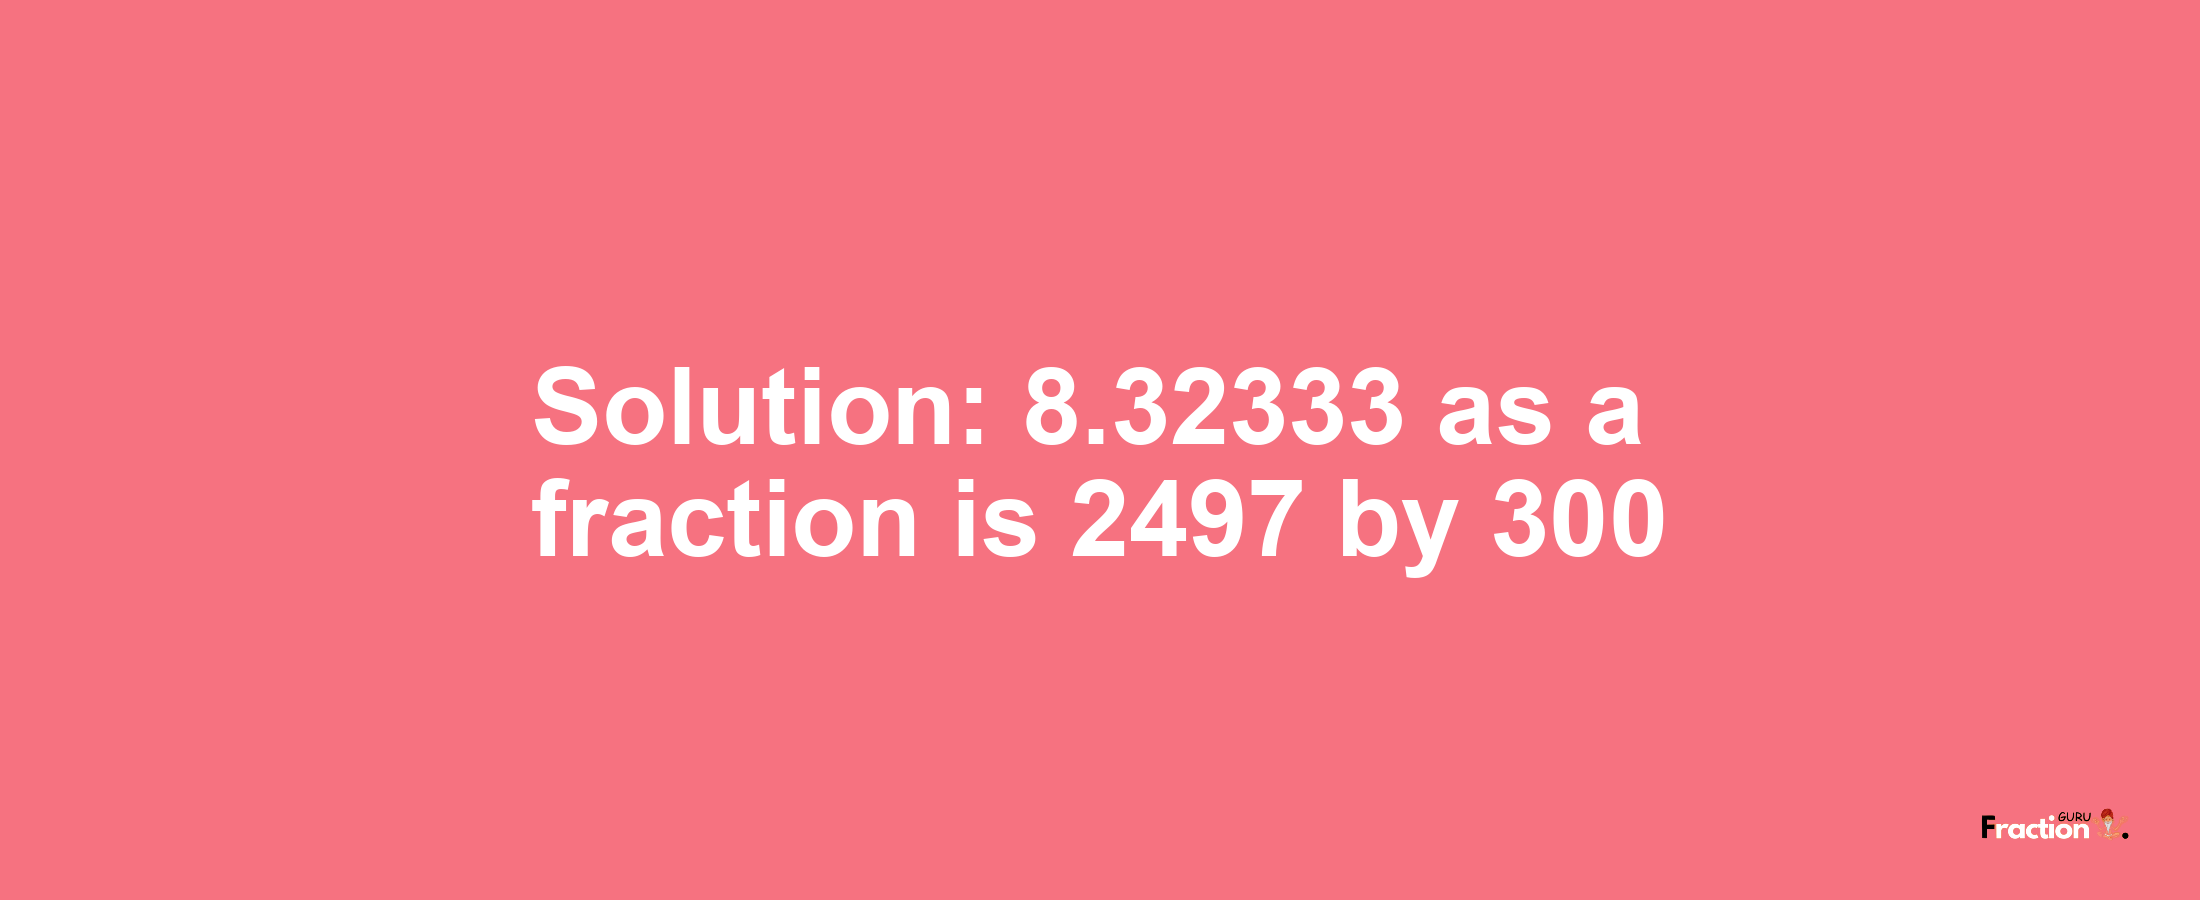 Solution:8.32333 as a fraction is 2497/300